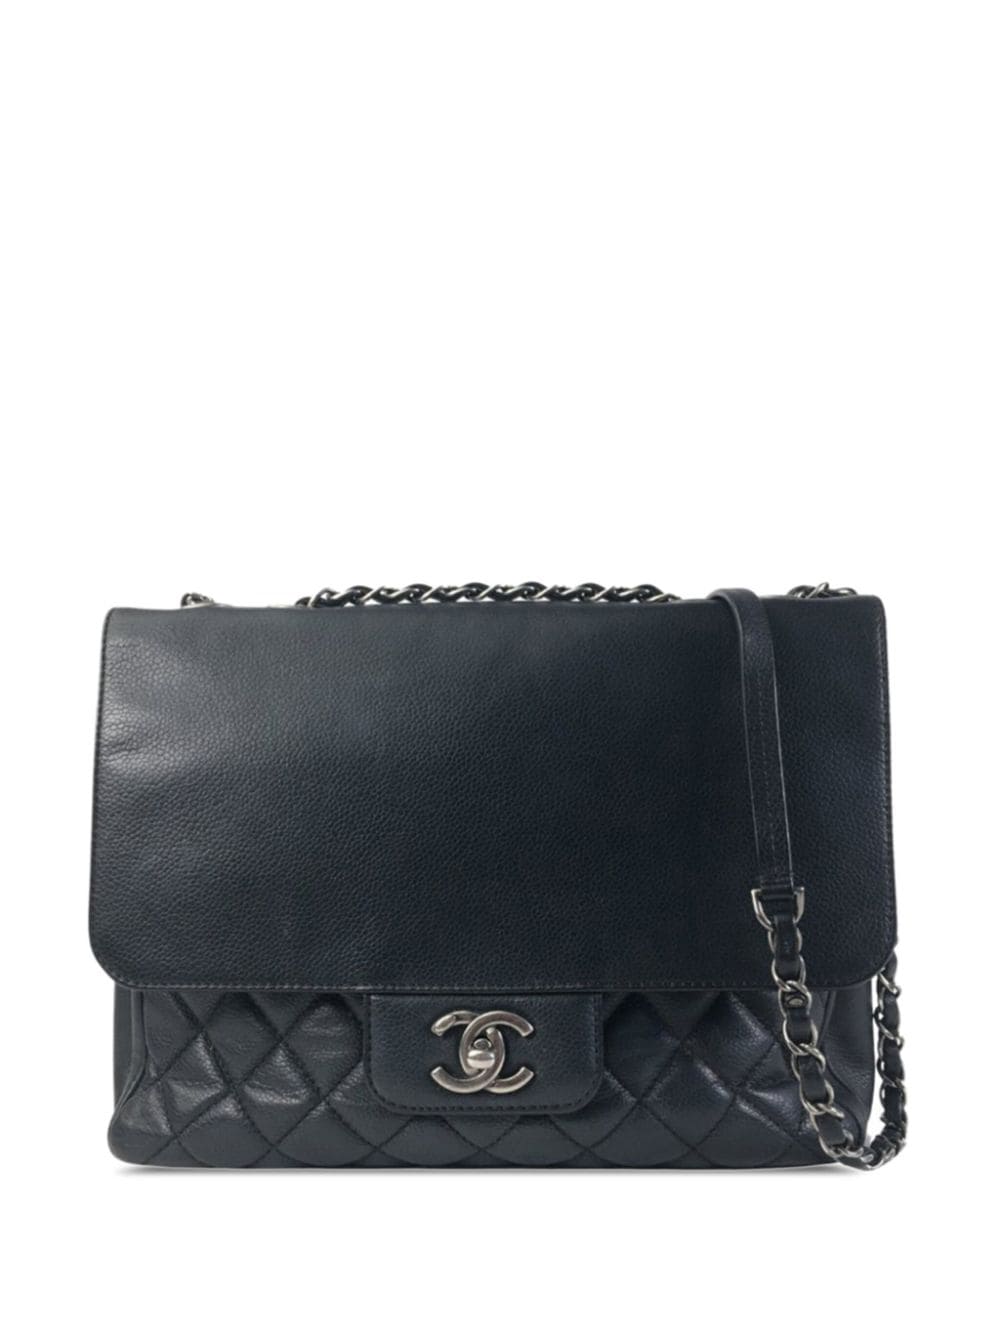 Pre-owned Chanel 2017-2018 Large Caviar All About Flap Crossbody Bag In Black